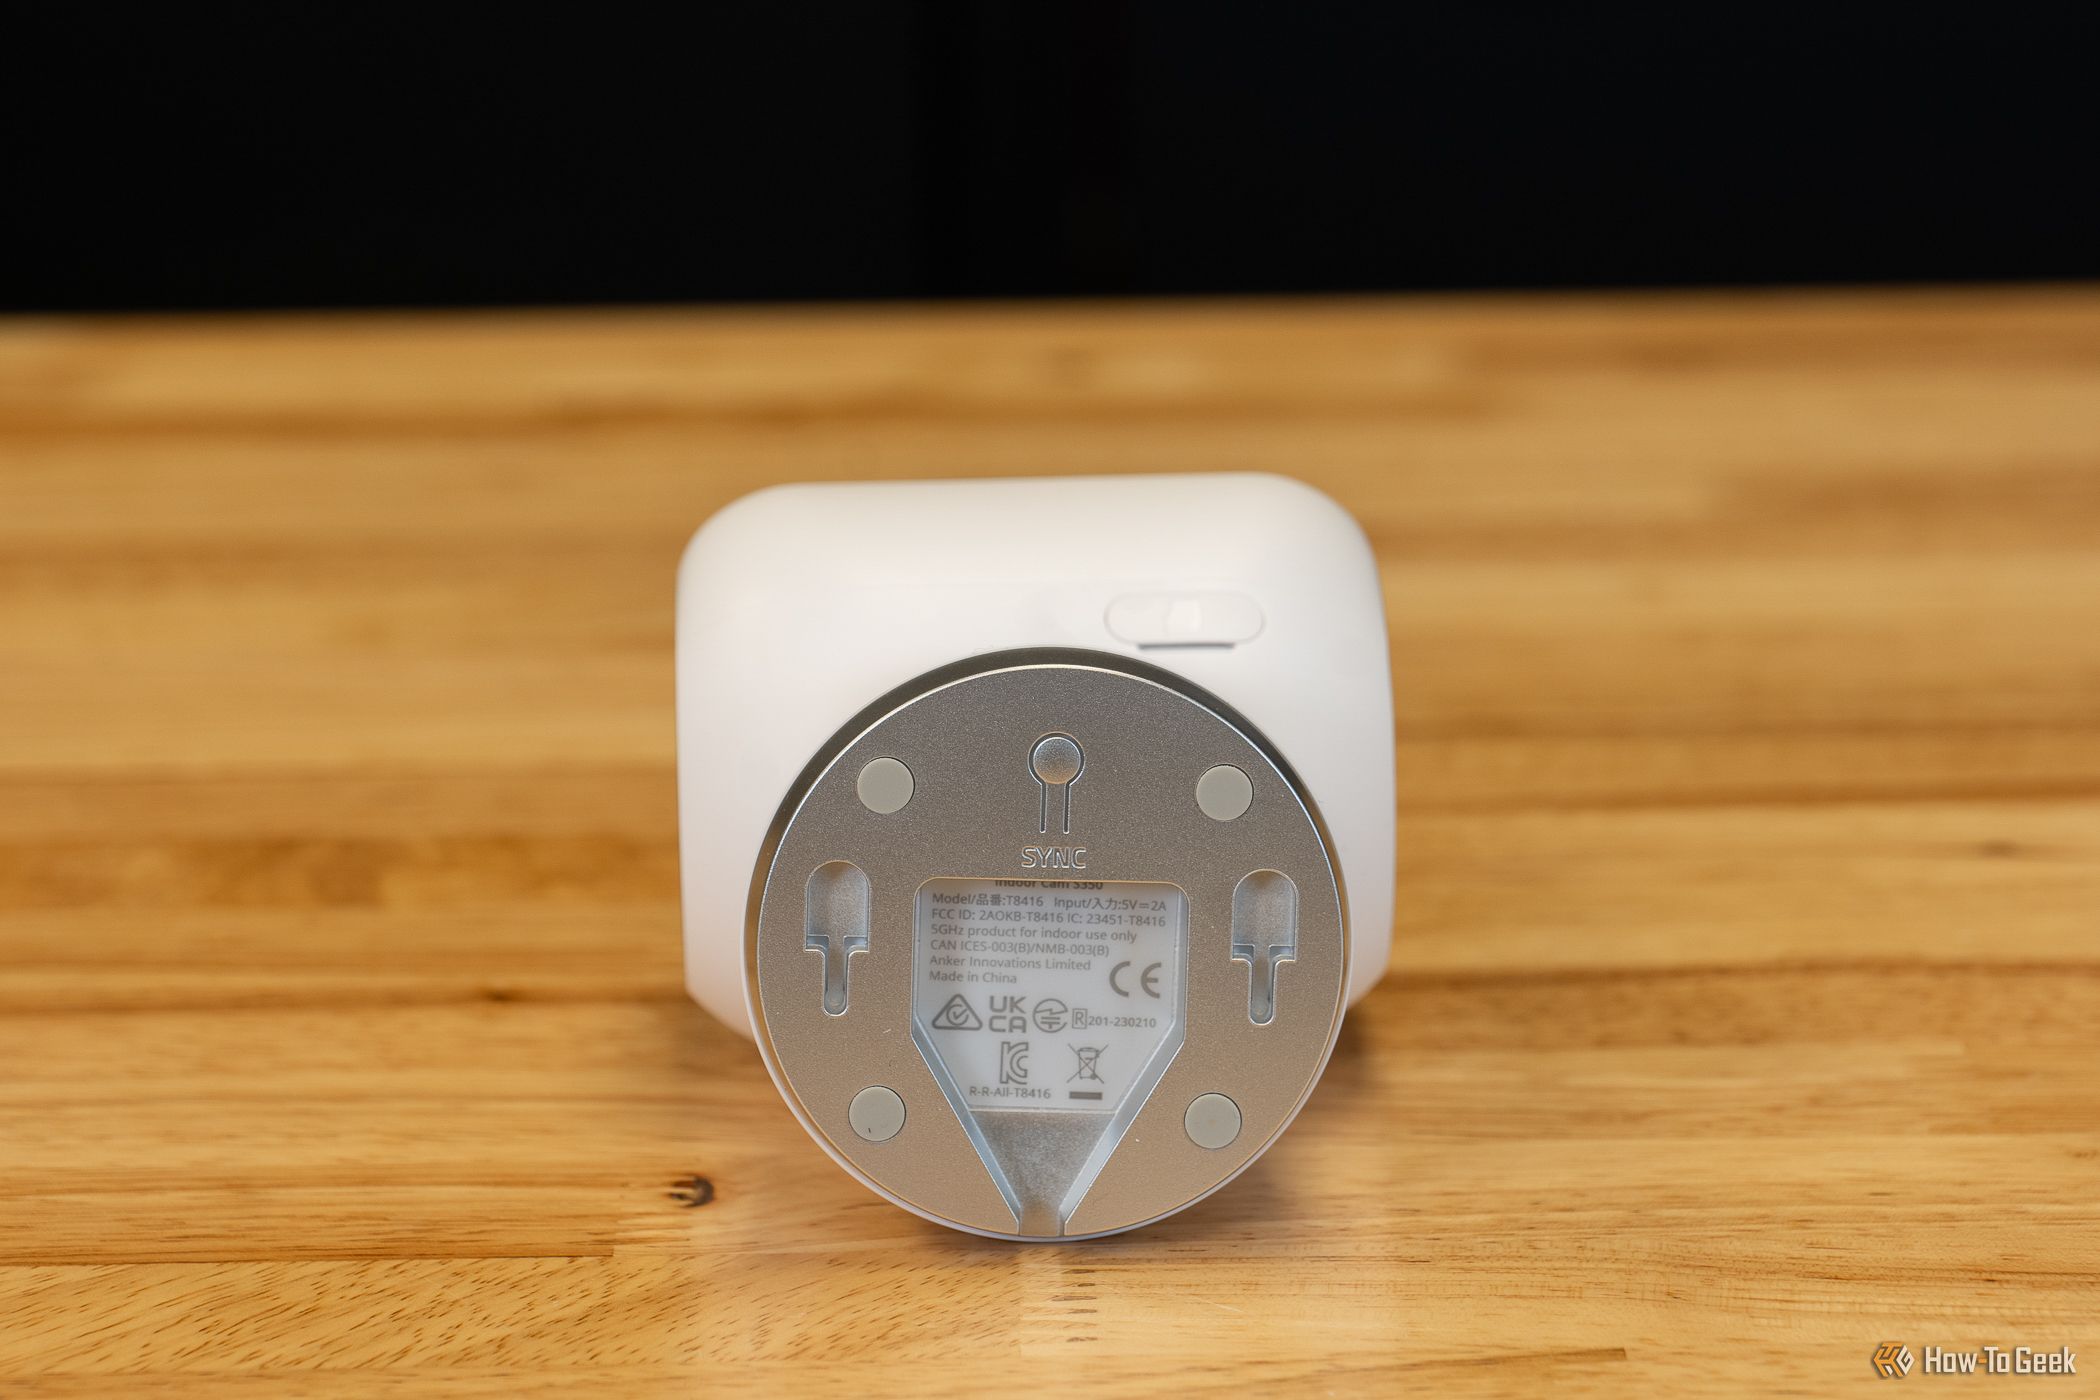 Bottom of the Eufy Security Indoor Cam S350